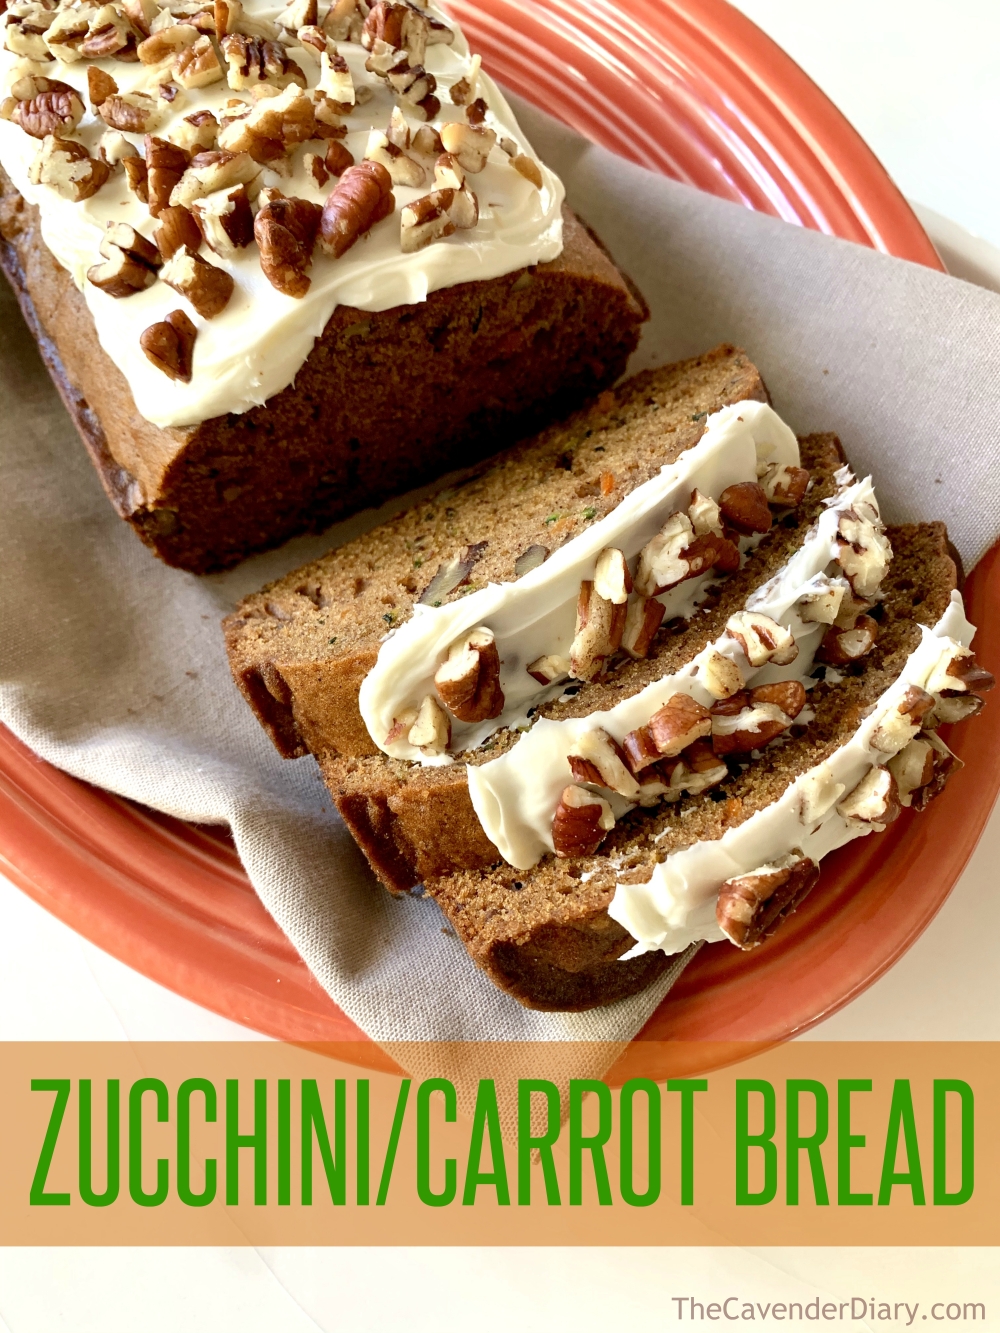 Zucchini Carrot Bread from the Cavender Diary Boys